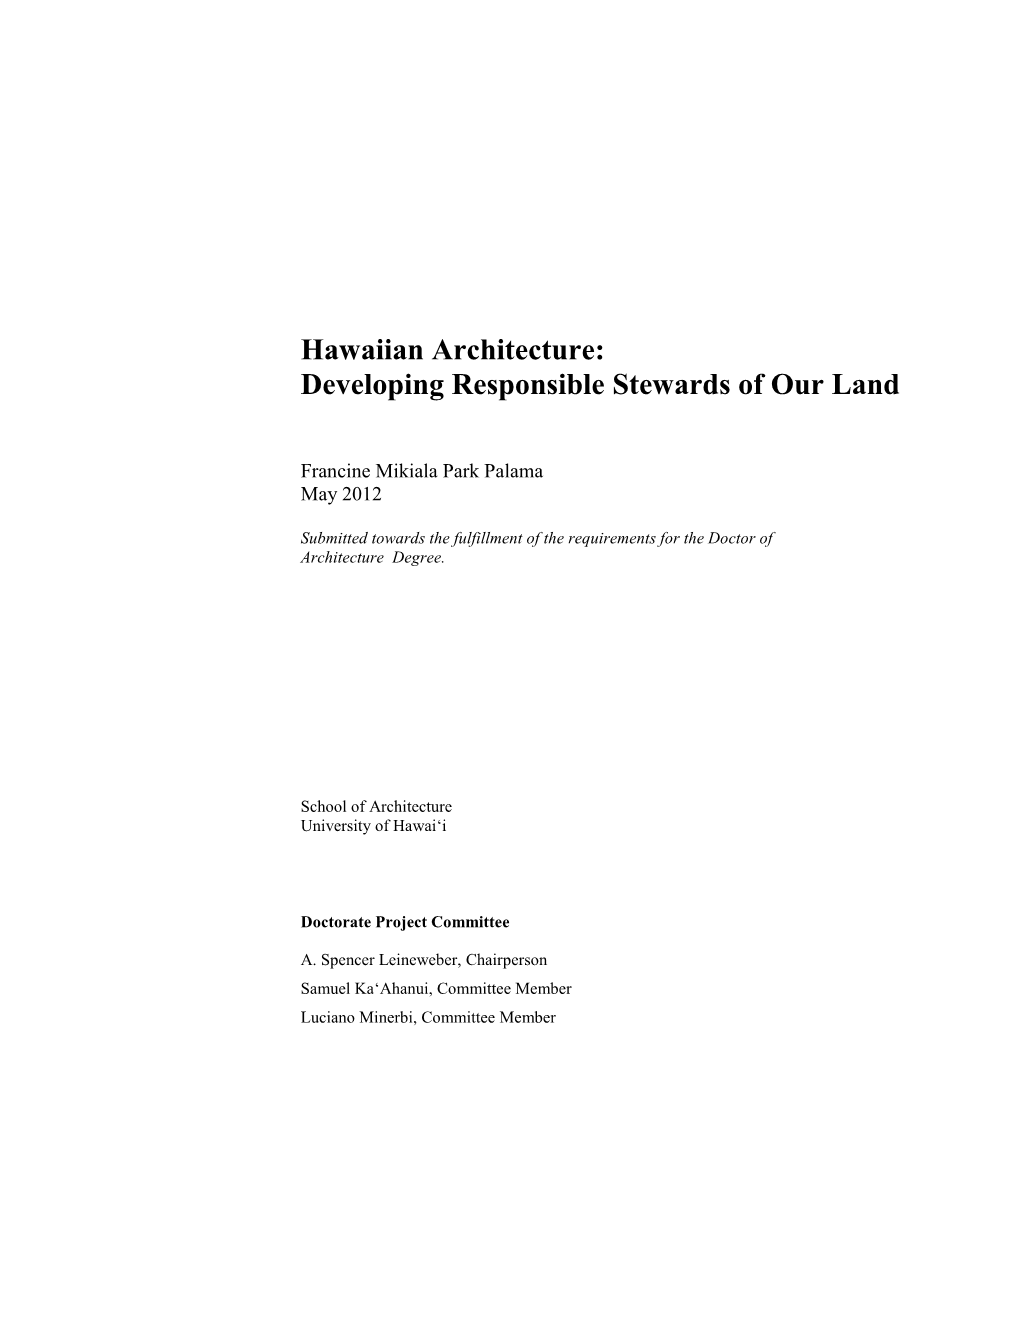 Hawaiian Architecture: Developing Responsible Stewards of Our Land